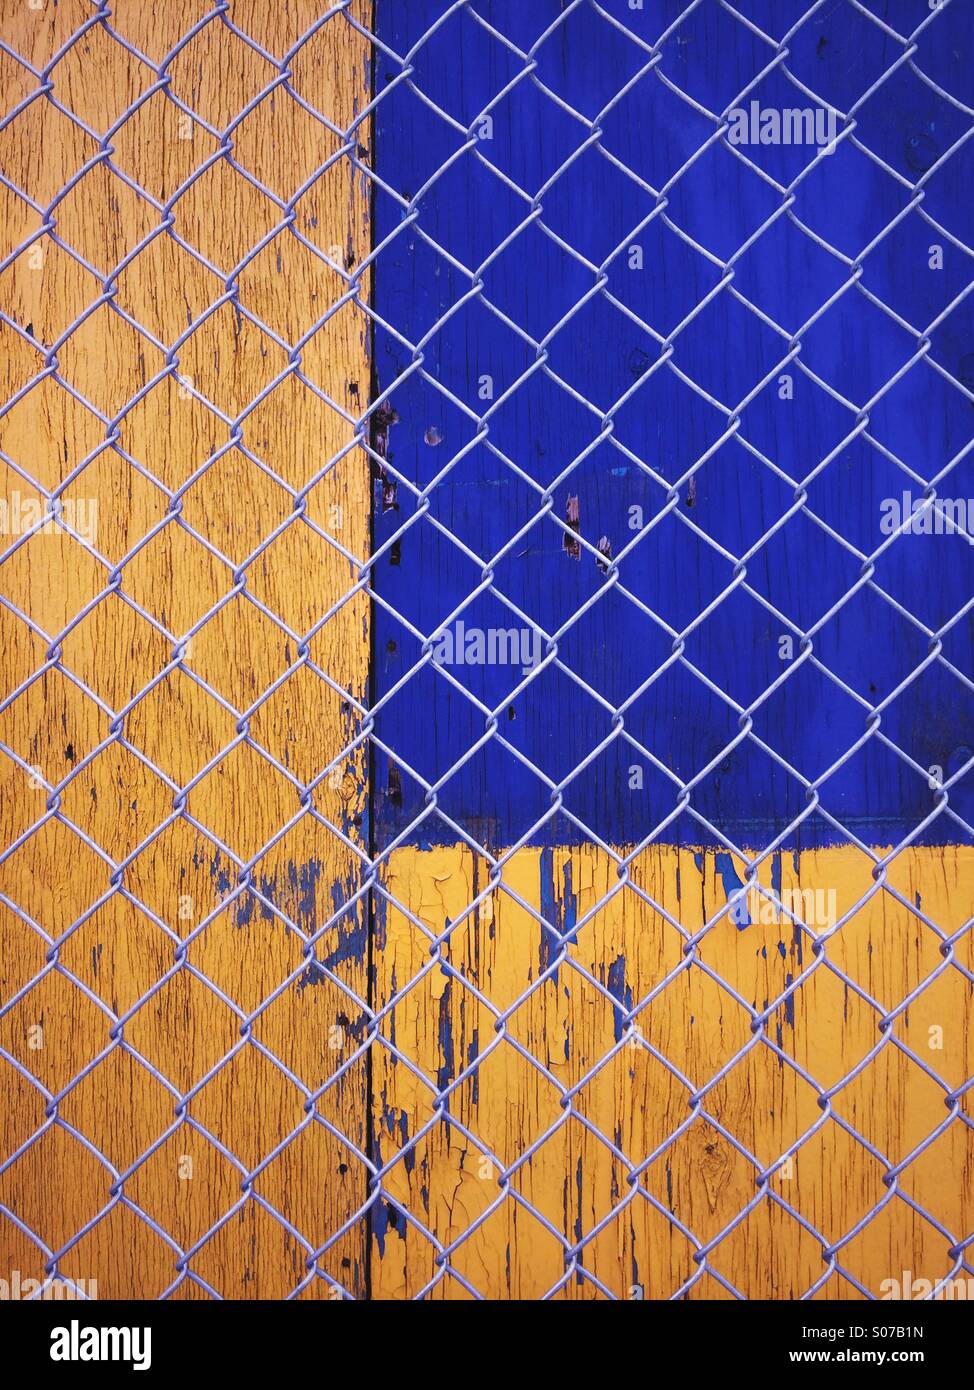 Yellow and blue abstract urban textures. Painted wooden panels behind a chainlink fence. Stock Photo